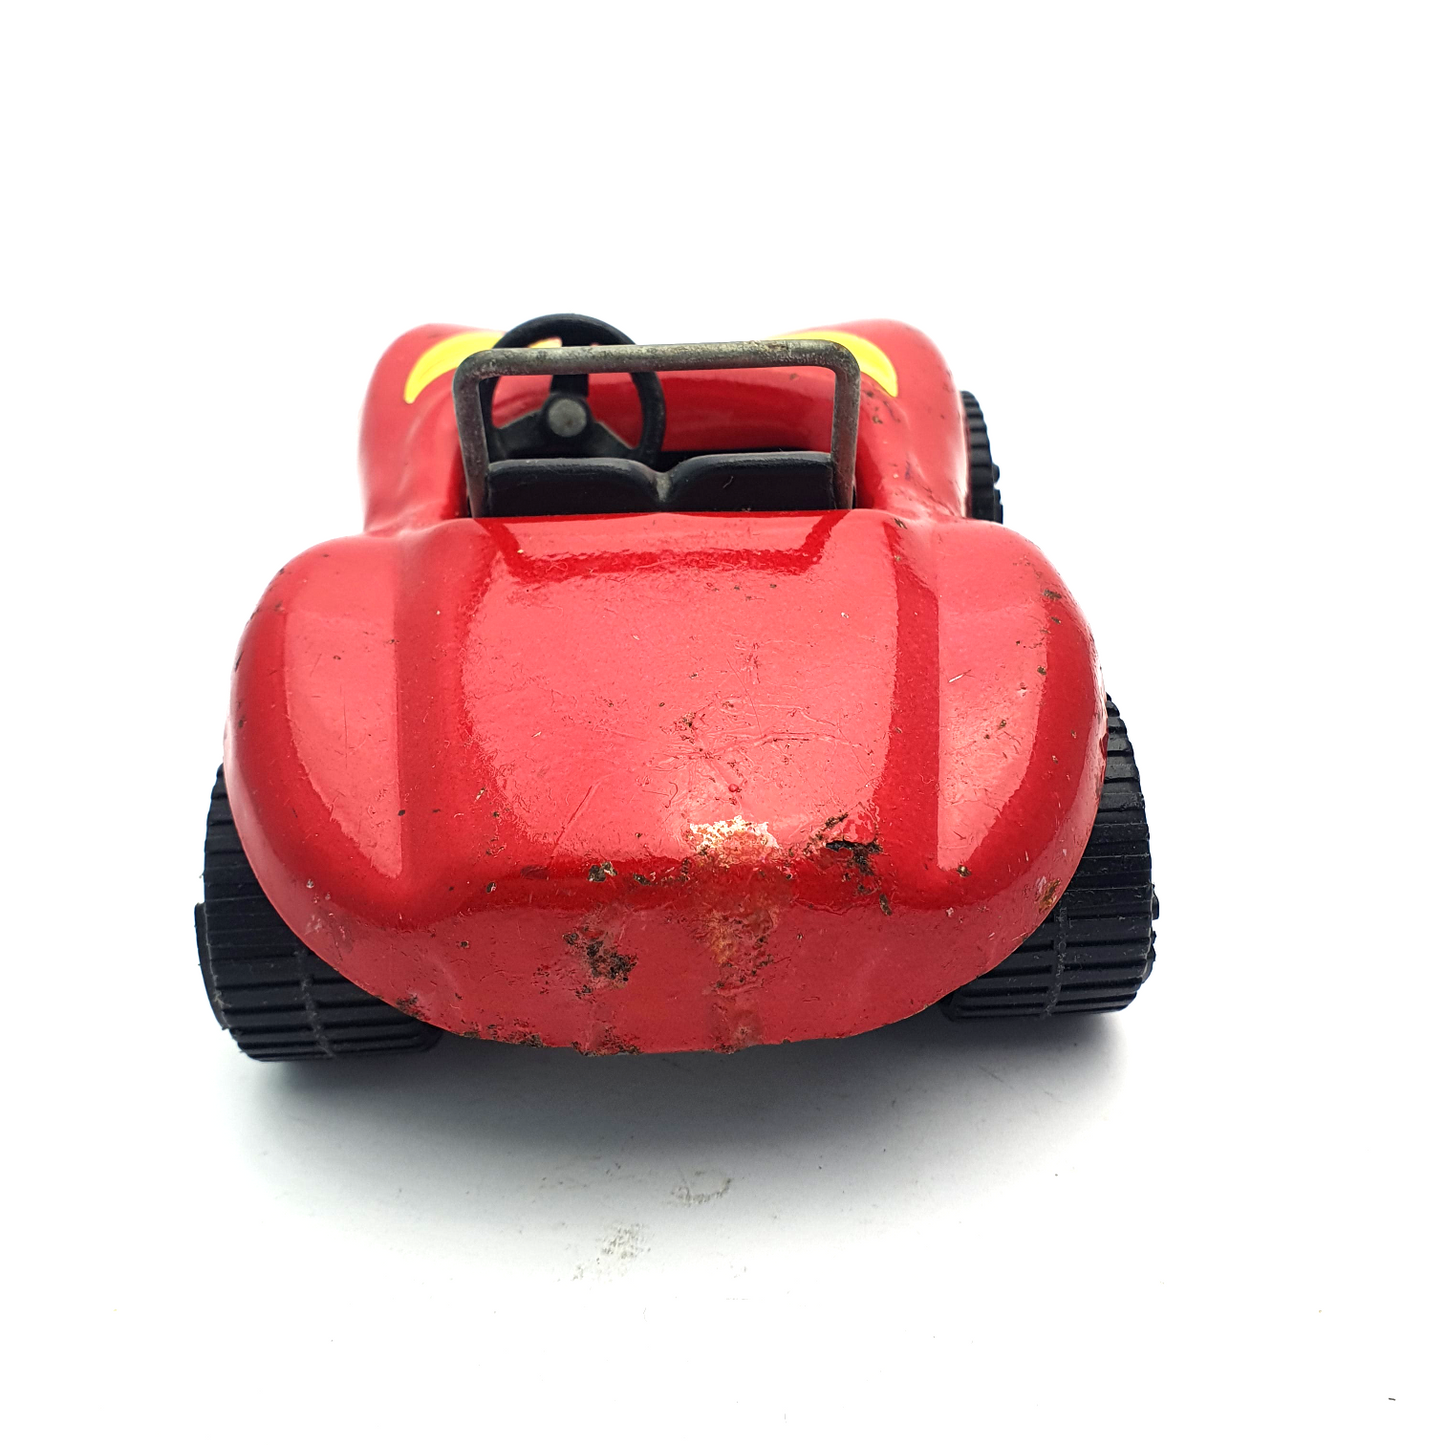 VINTAGE TONKA DUNE BUGGY Car Red Steel Toy ☆ Loose Used 52790 1970s